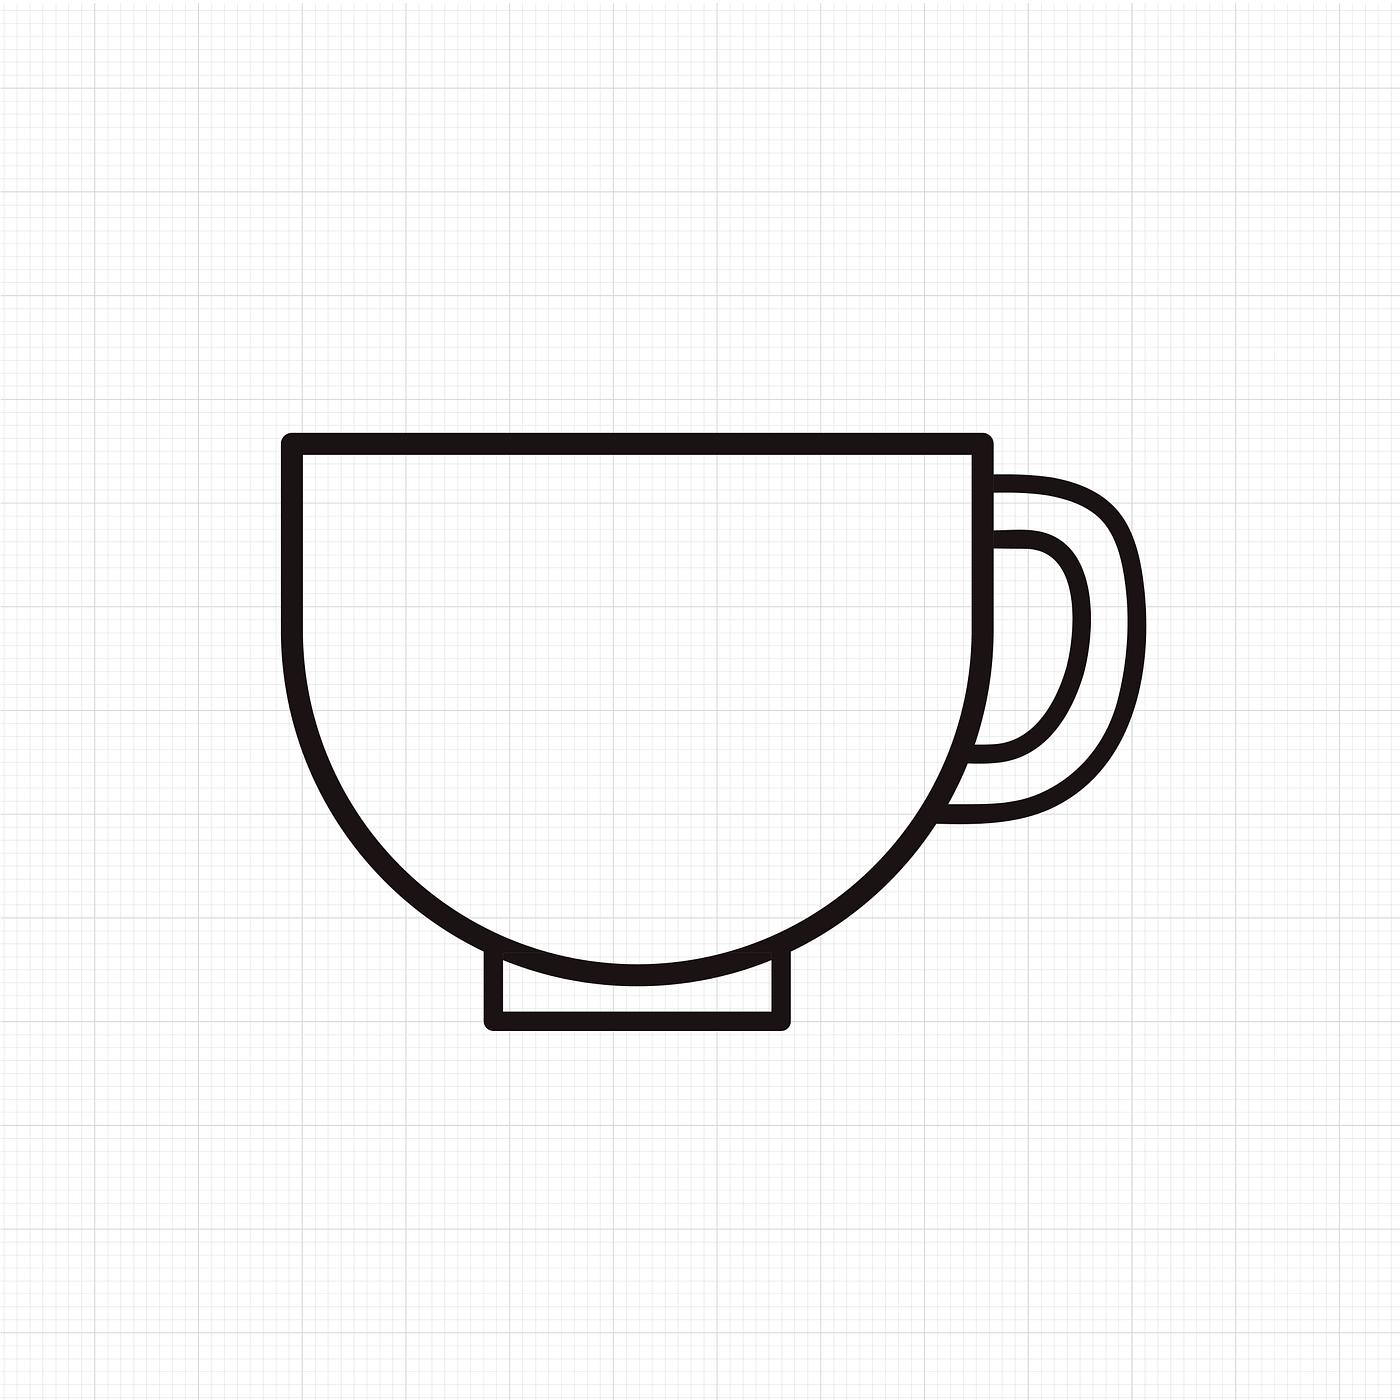 Download Vector of coffee cup icon | Free stock vector - 16569